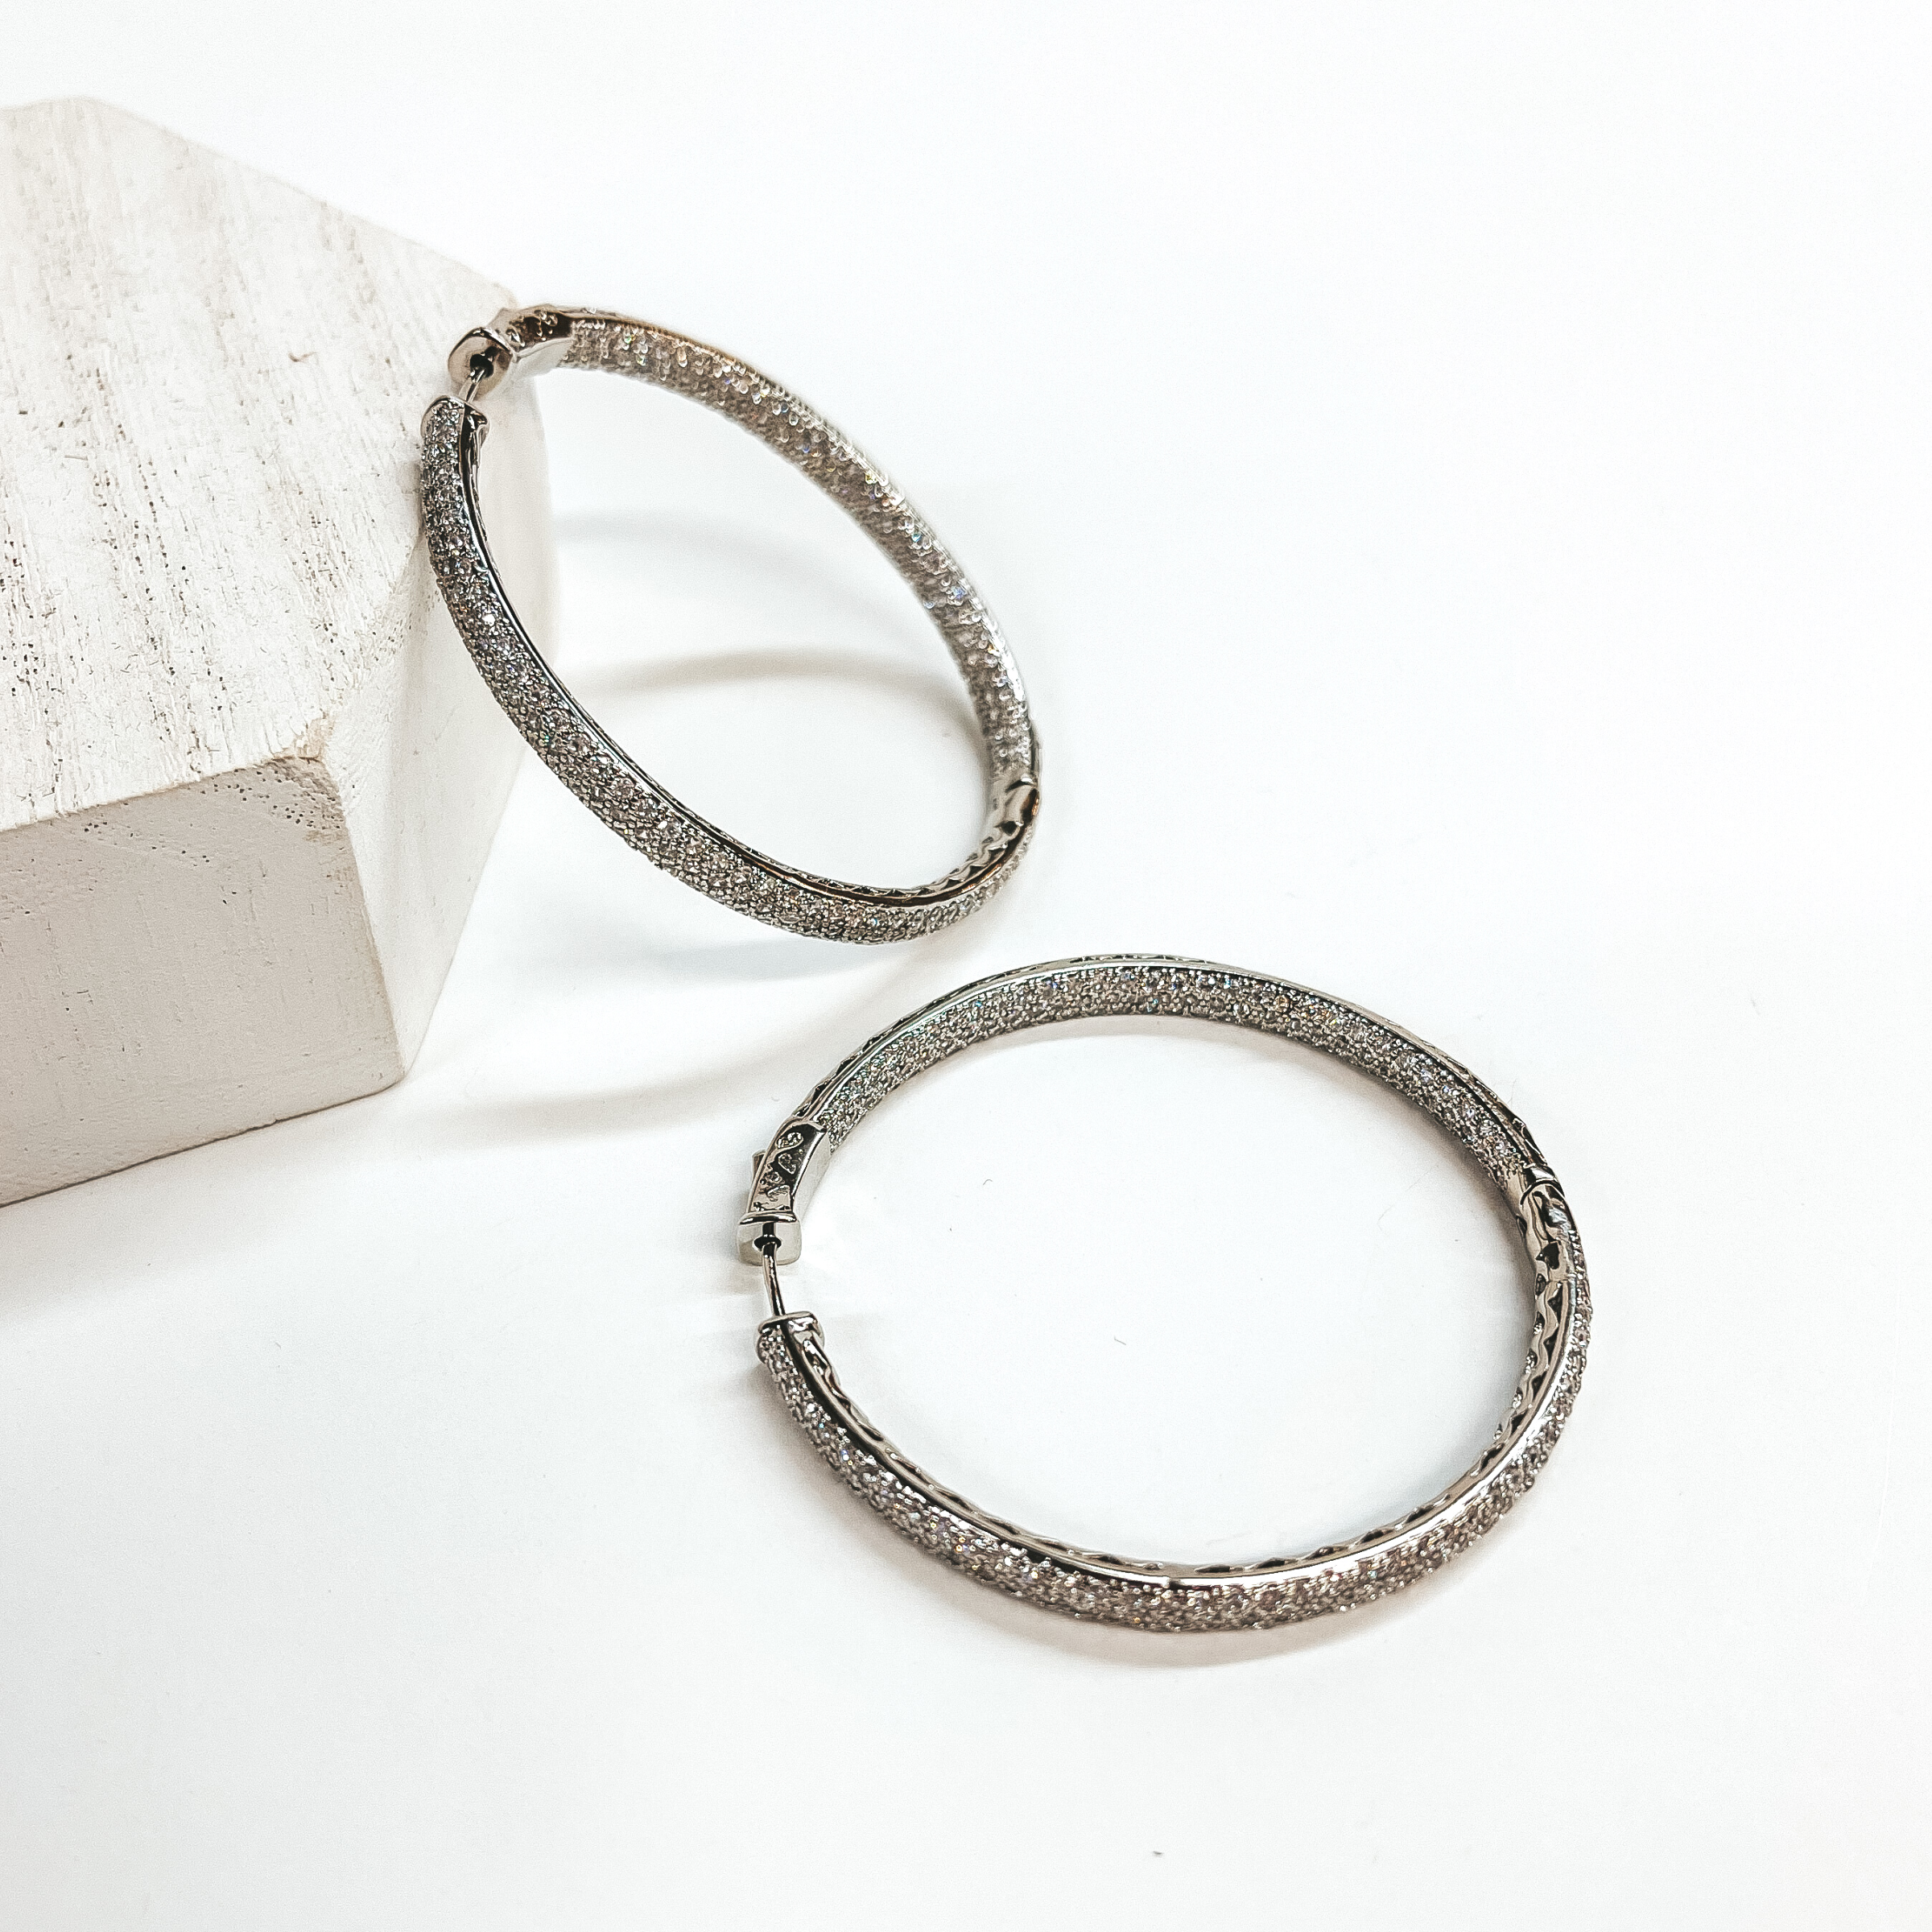 CZ Crystal Pave Hoop Earrings in Silver - Giddy Up Glamour Boutique